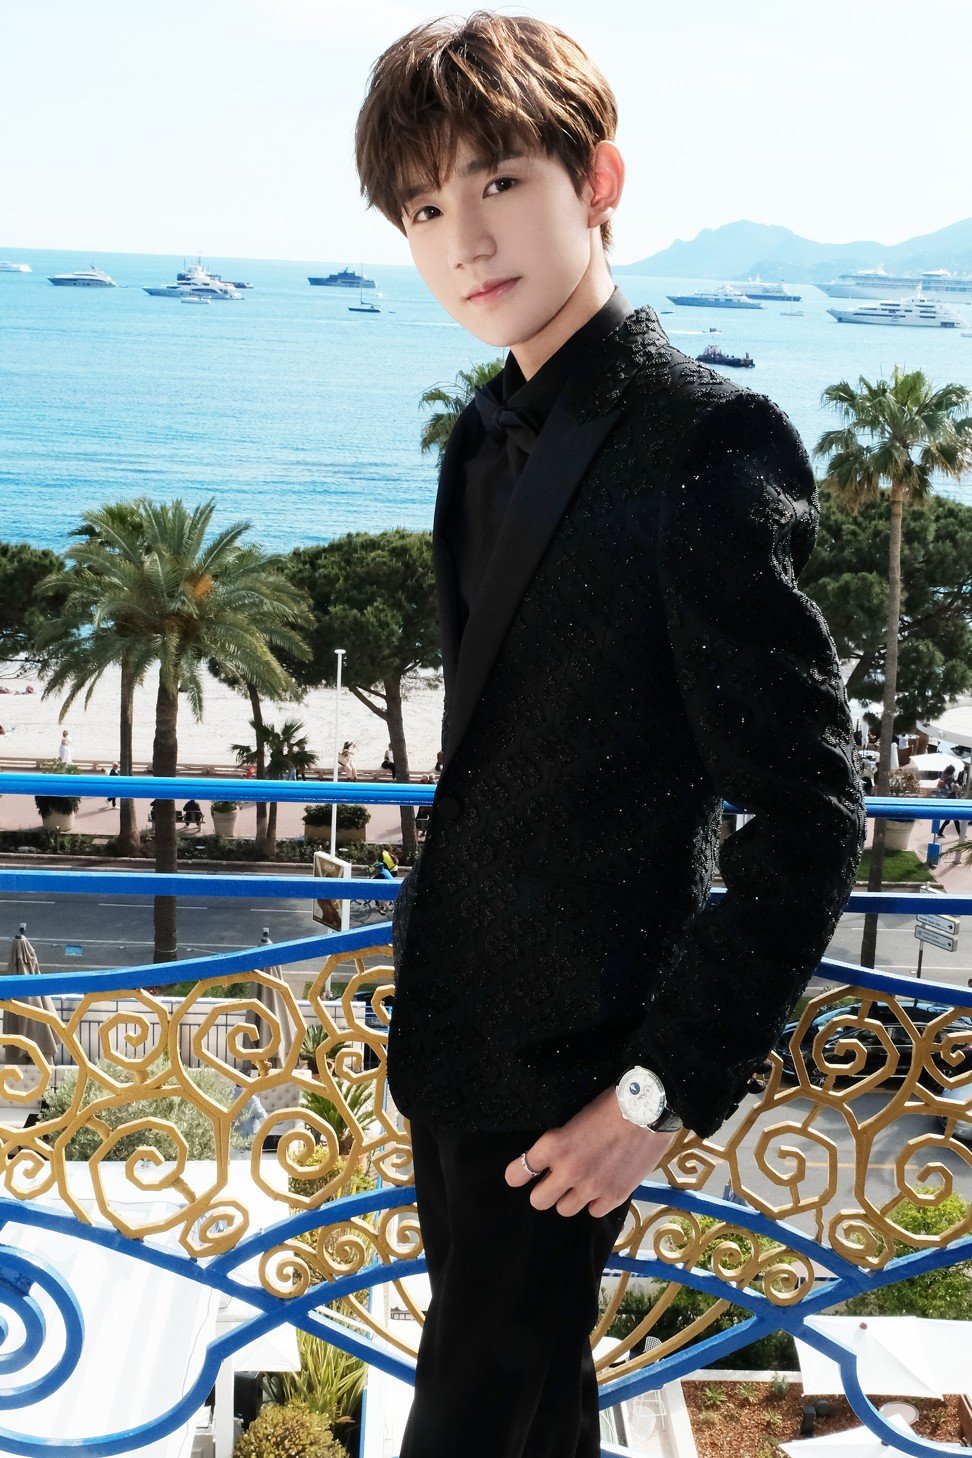 Wang at the Cannes Film Festival in May 2018.